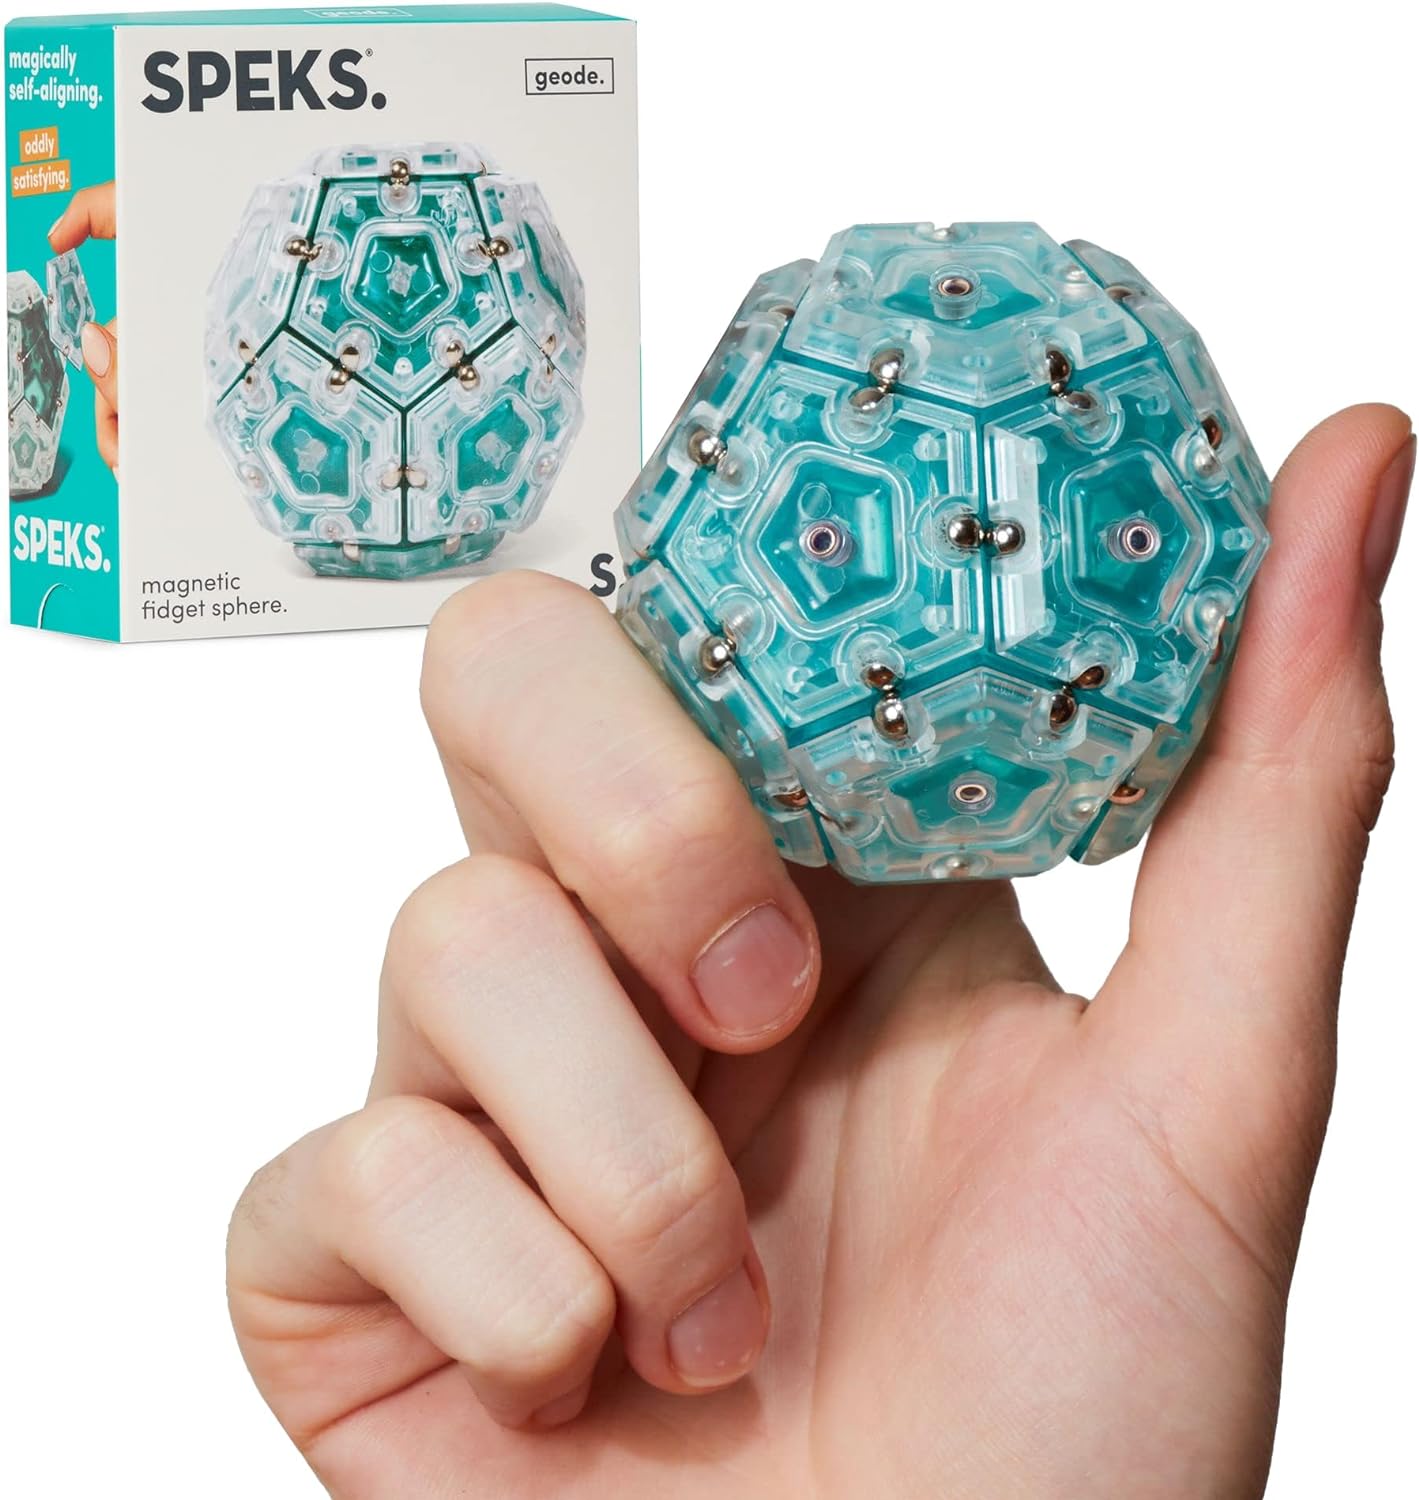 Sphere Magnetic Geode Toy - Quiet Sensory Toy for Stress Relief and Anxiety